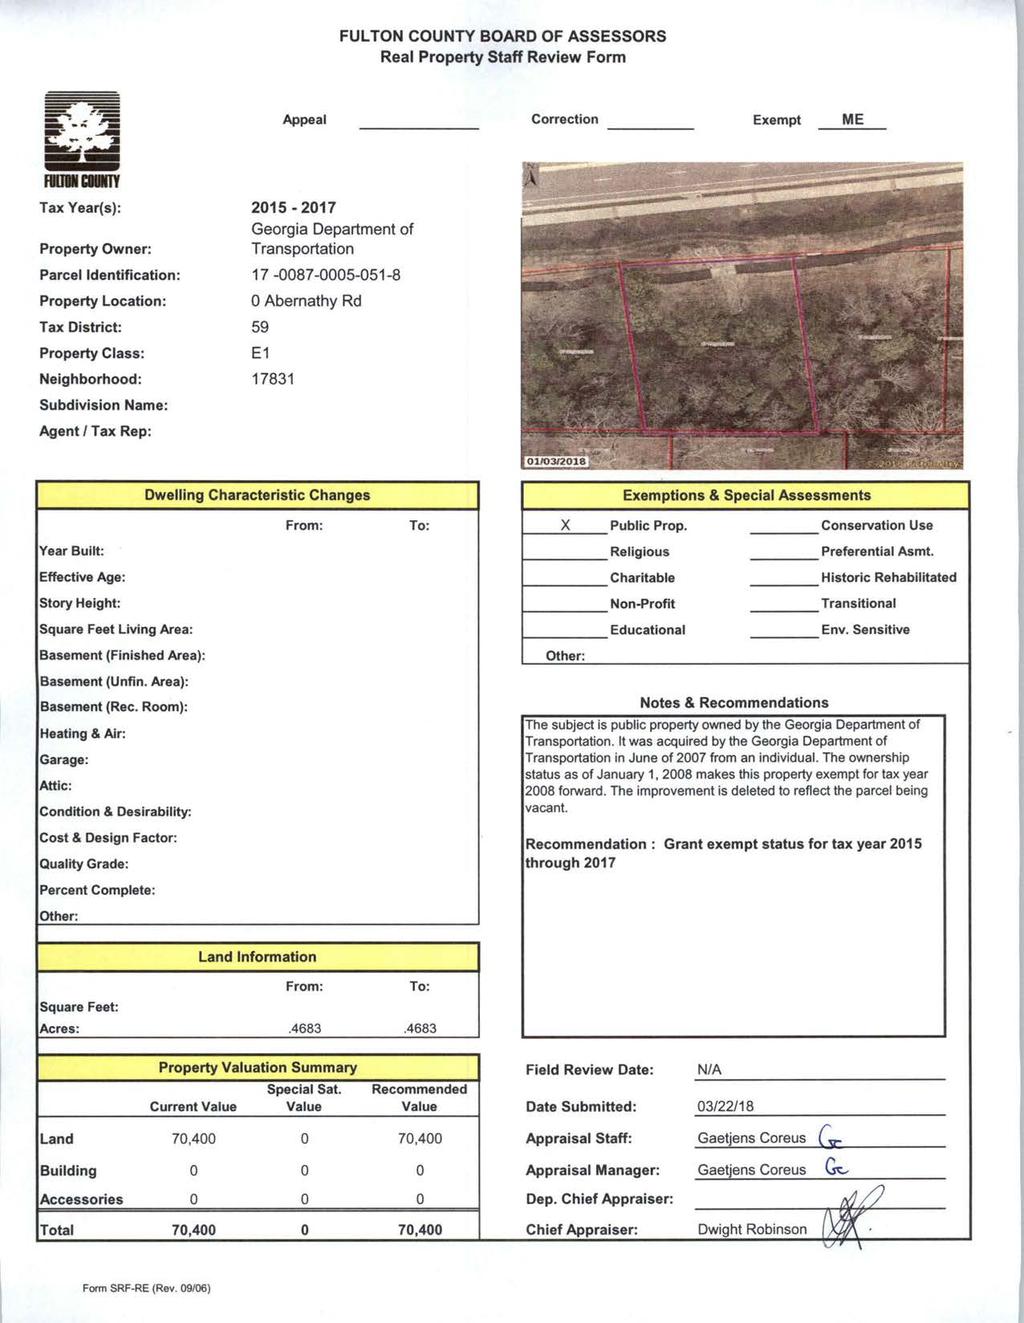 FULTON COUNTY BOARD OF ASSESSORS Real Property Staff Review Form Appeal Correction Exempt ME Tax Year(s): Property Owner: Parcel Identification: Property Location: Tax District: Property Class: